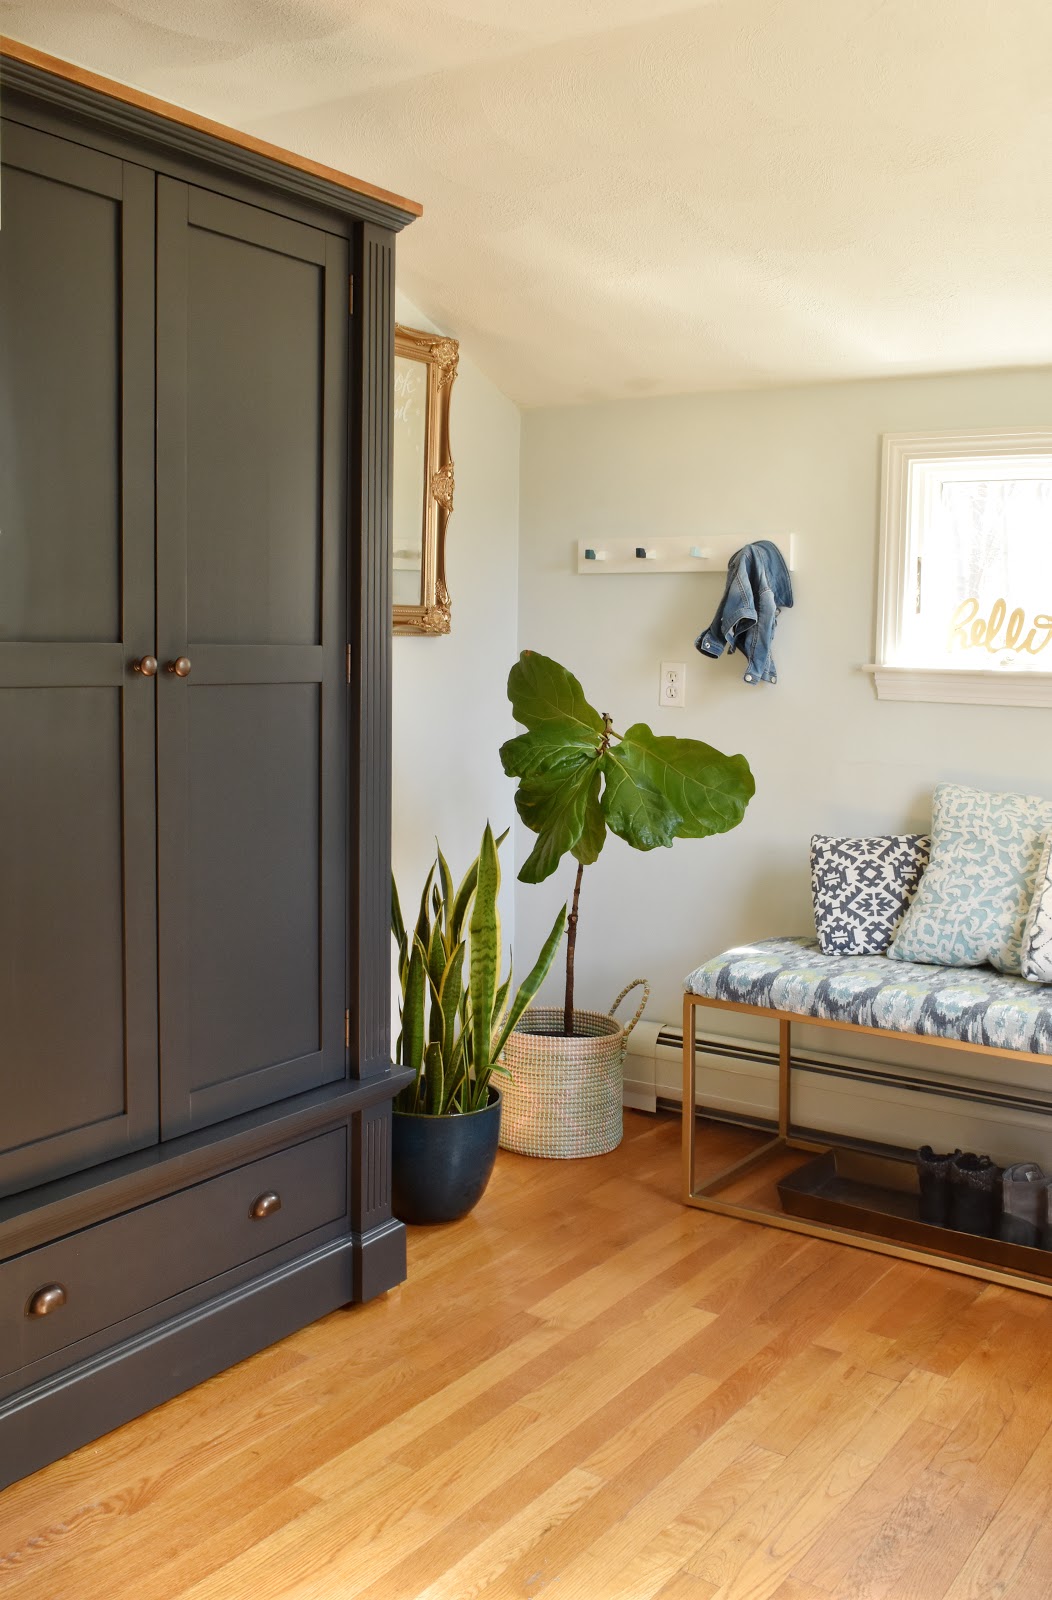 Our Entryway Makeover – An Armoire For The Win! /// By Design Fixation #entryway #makeover #mudroom #refresh